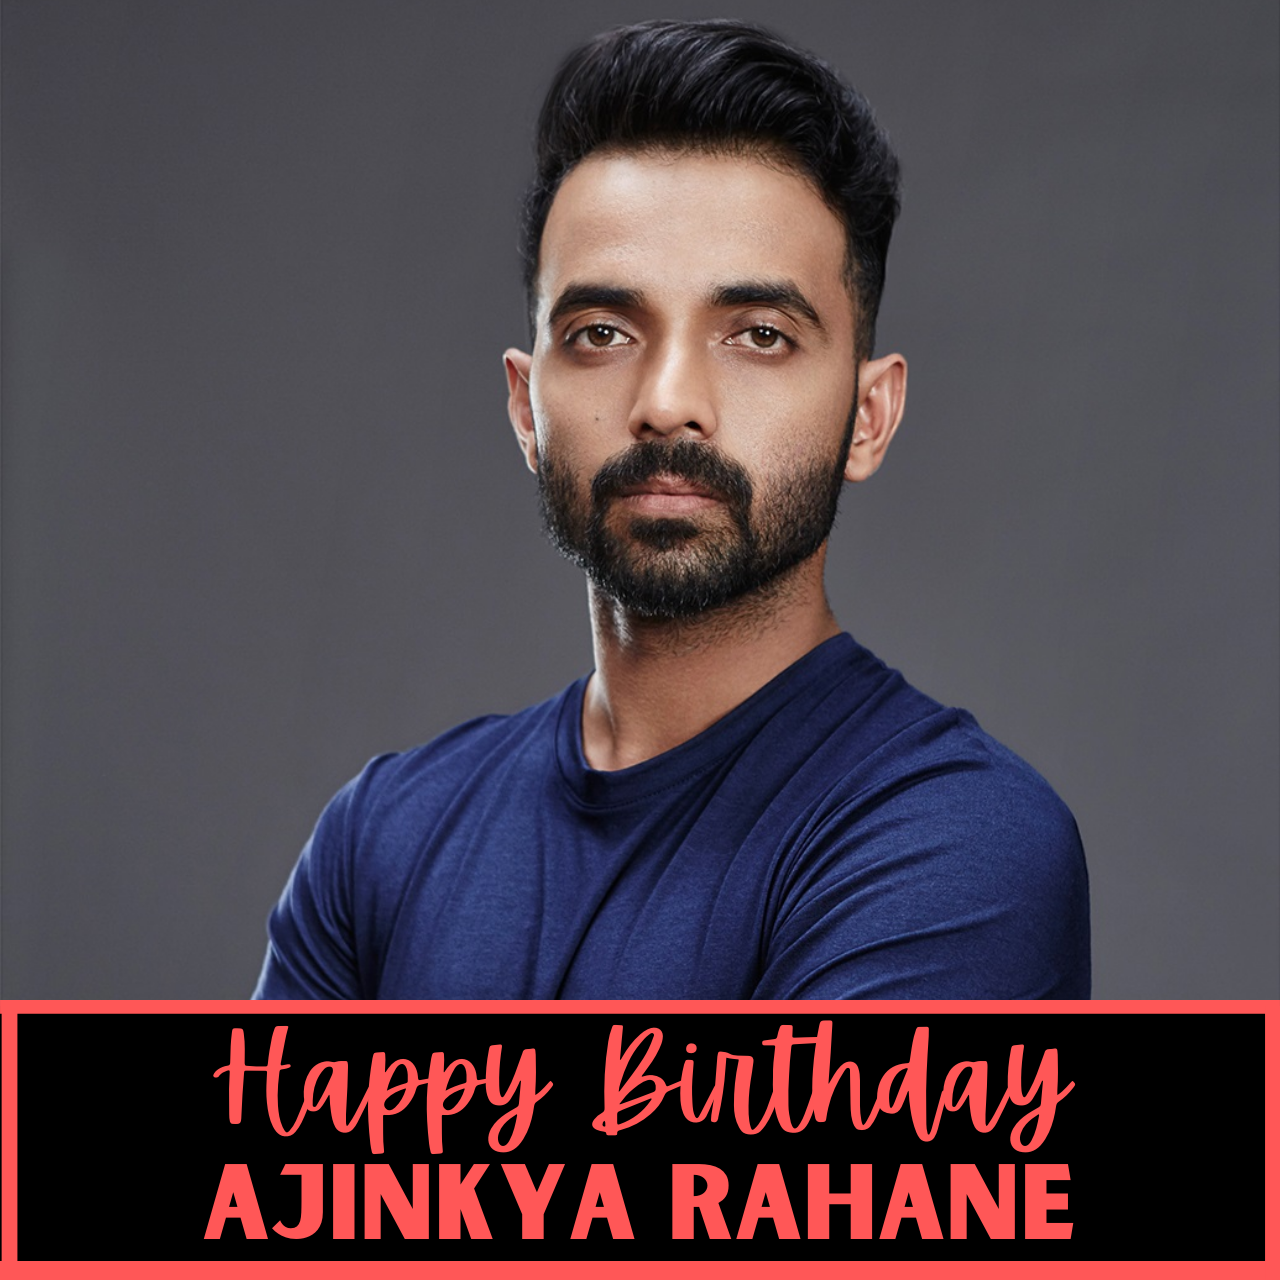 Happy Birthday Ajinkya Rahane: Wishes, Quotes, Images, Messages, and Status to greet the former captain of the Indian cricket team